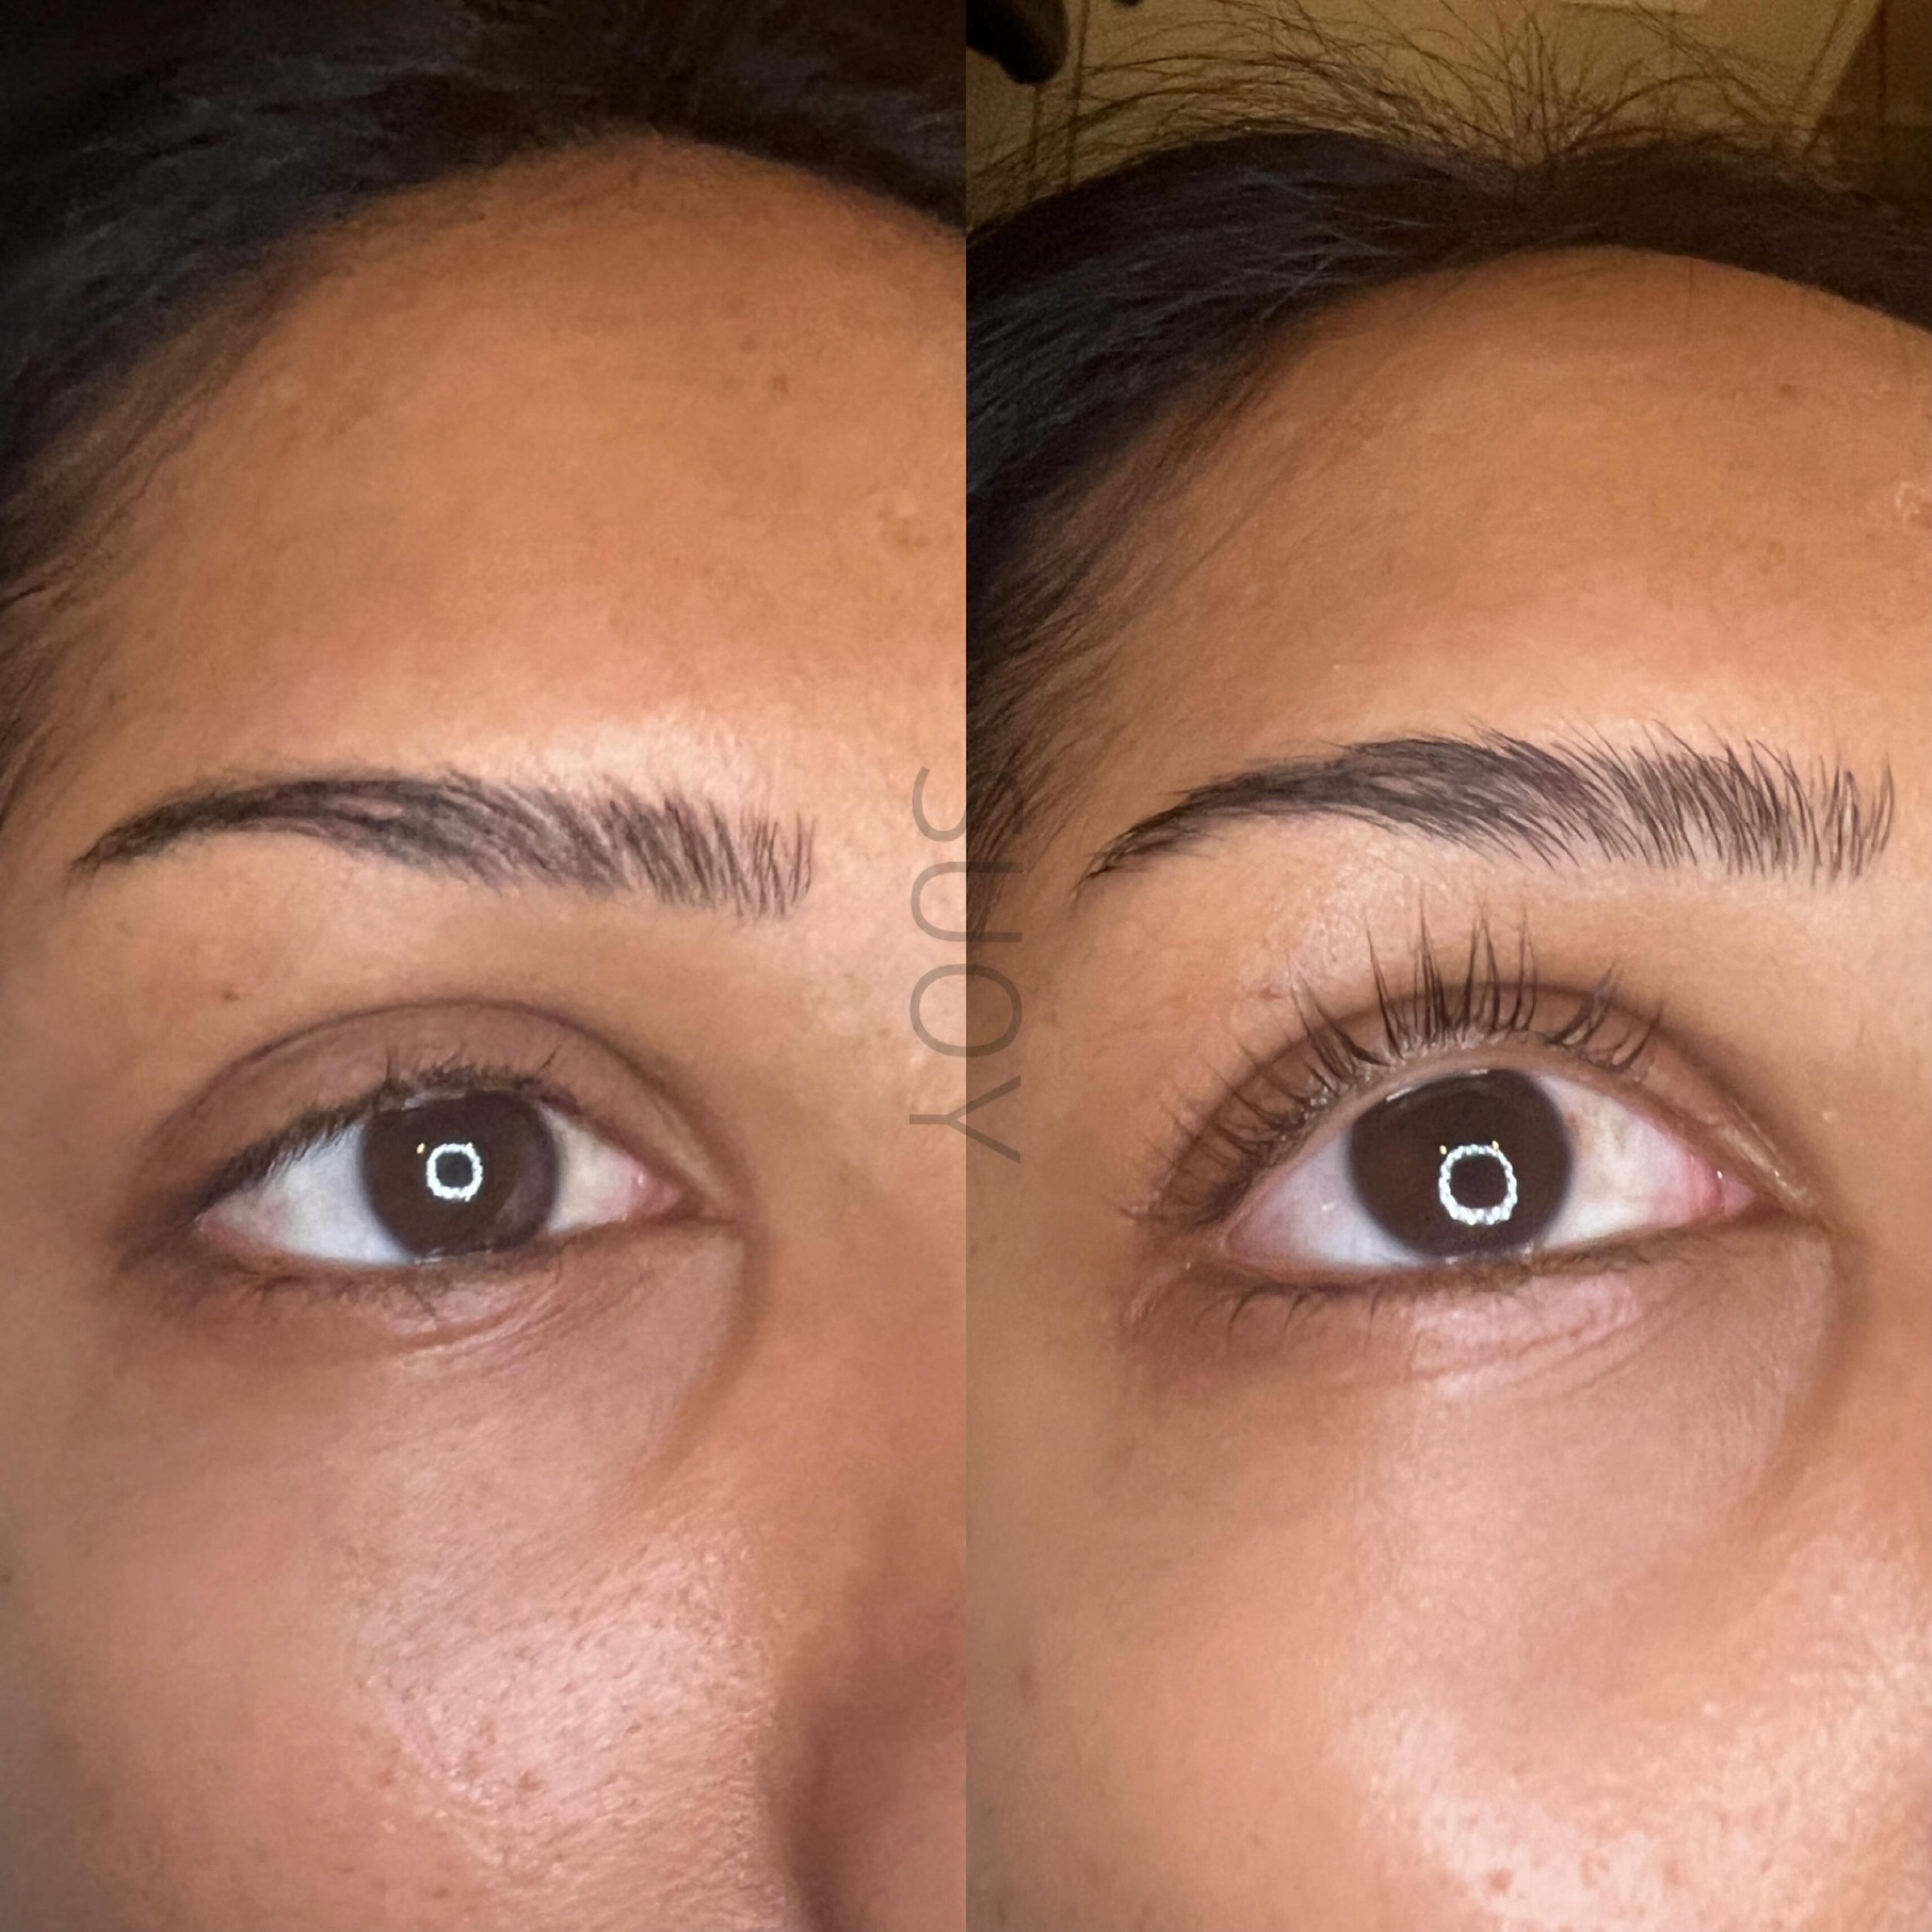 Sometimes you forget you have amazing lashes and just need a lift! 

Are you using the best products for your Keratin Lash Lifts or Brow Laminations? 

Here&rsquo;s why we choose YUMI for our services:

&bull;No harsh chemicals
&bull;No ammonia
&bull